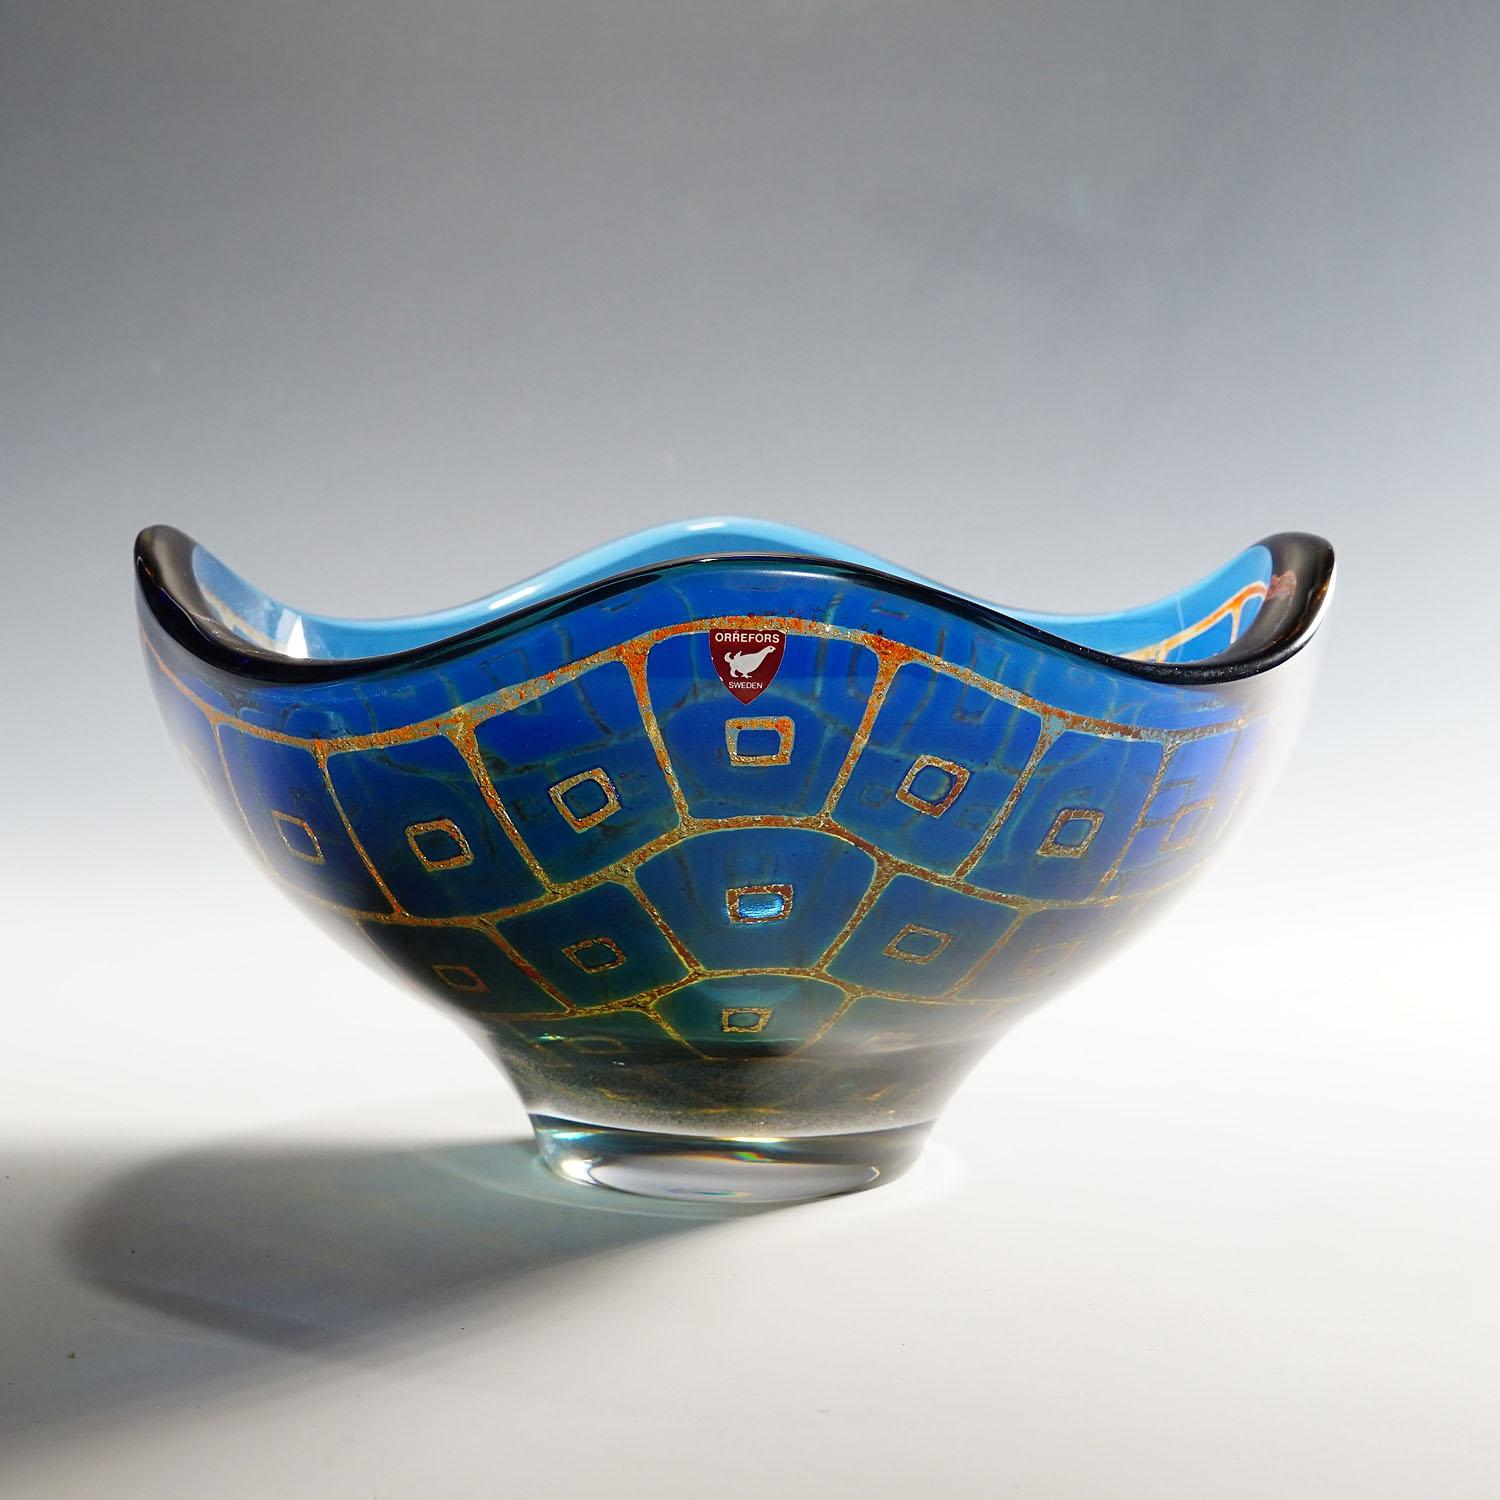 Ravenna bowl by Sven Palmquist for Orrefors, Sweden 1950s

A heavy bowl of the Ravenna series designed by Sven Palmquist for Orrefors Sweden in the 1950s. The squarish bowl has round undulating edges and is made in blue glass decorated with